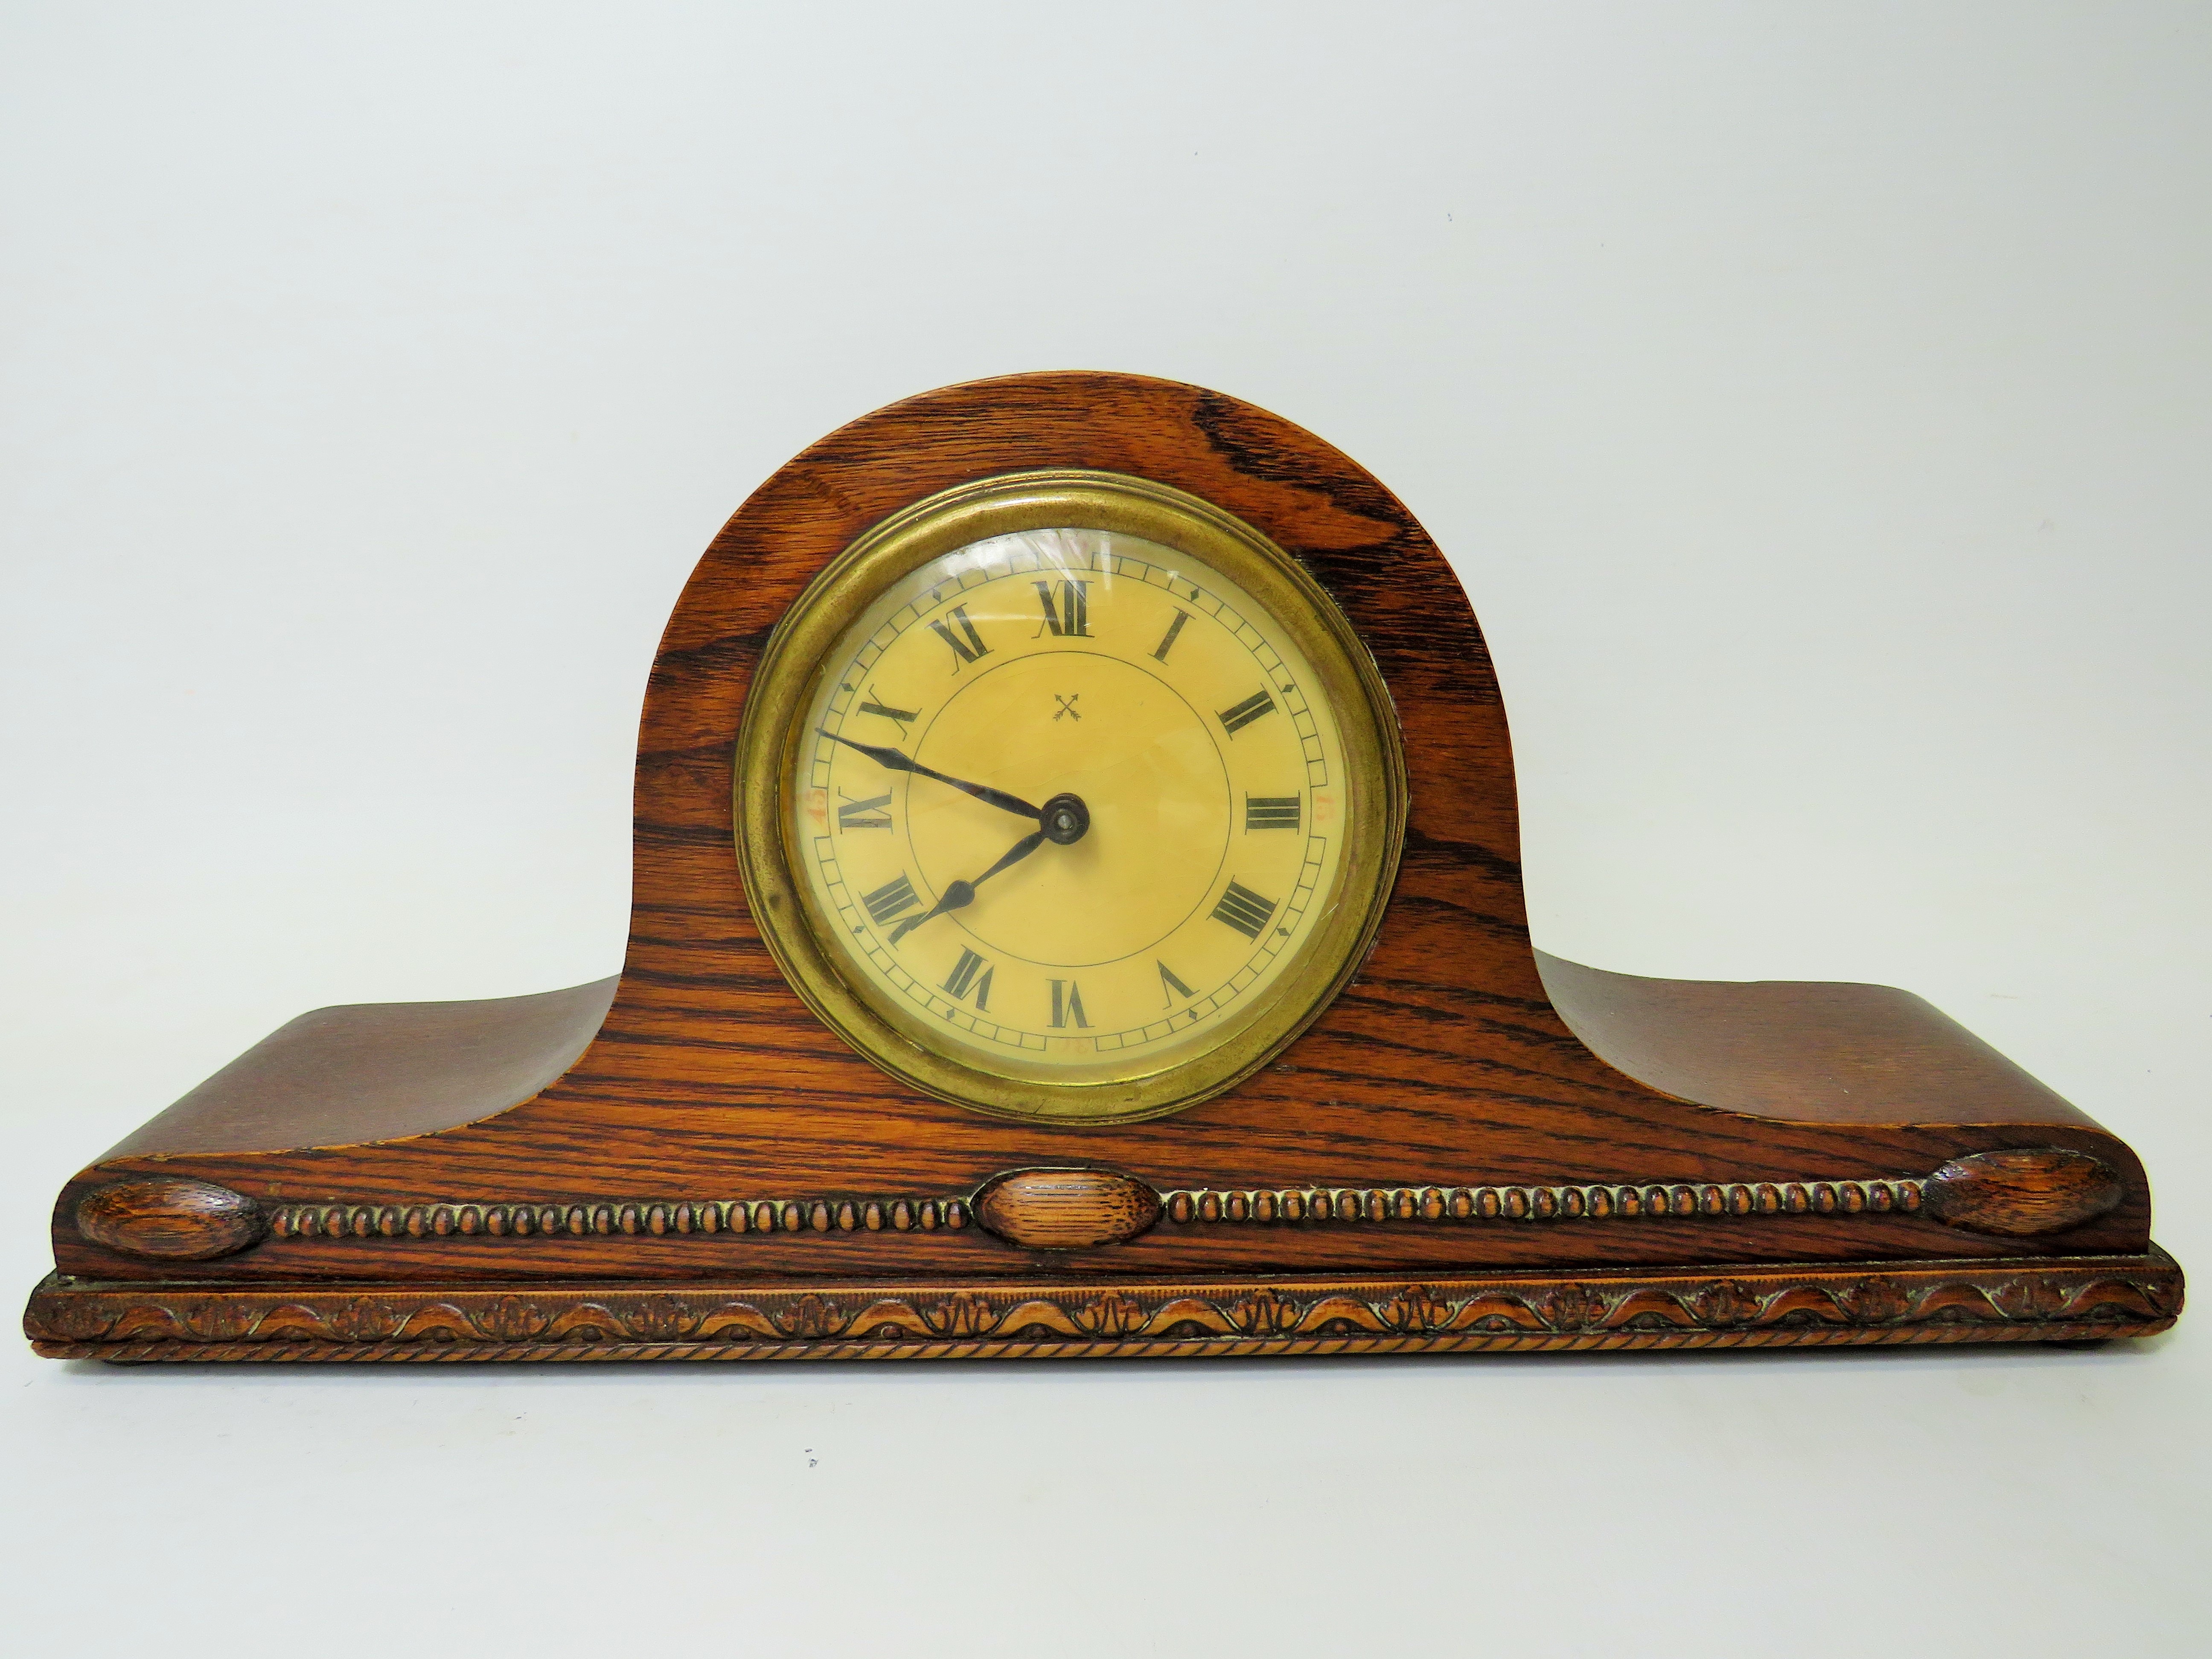 Oak cased mantle clock with ornate carving to the base. Brass mechanism in running order. Measures 1